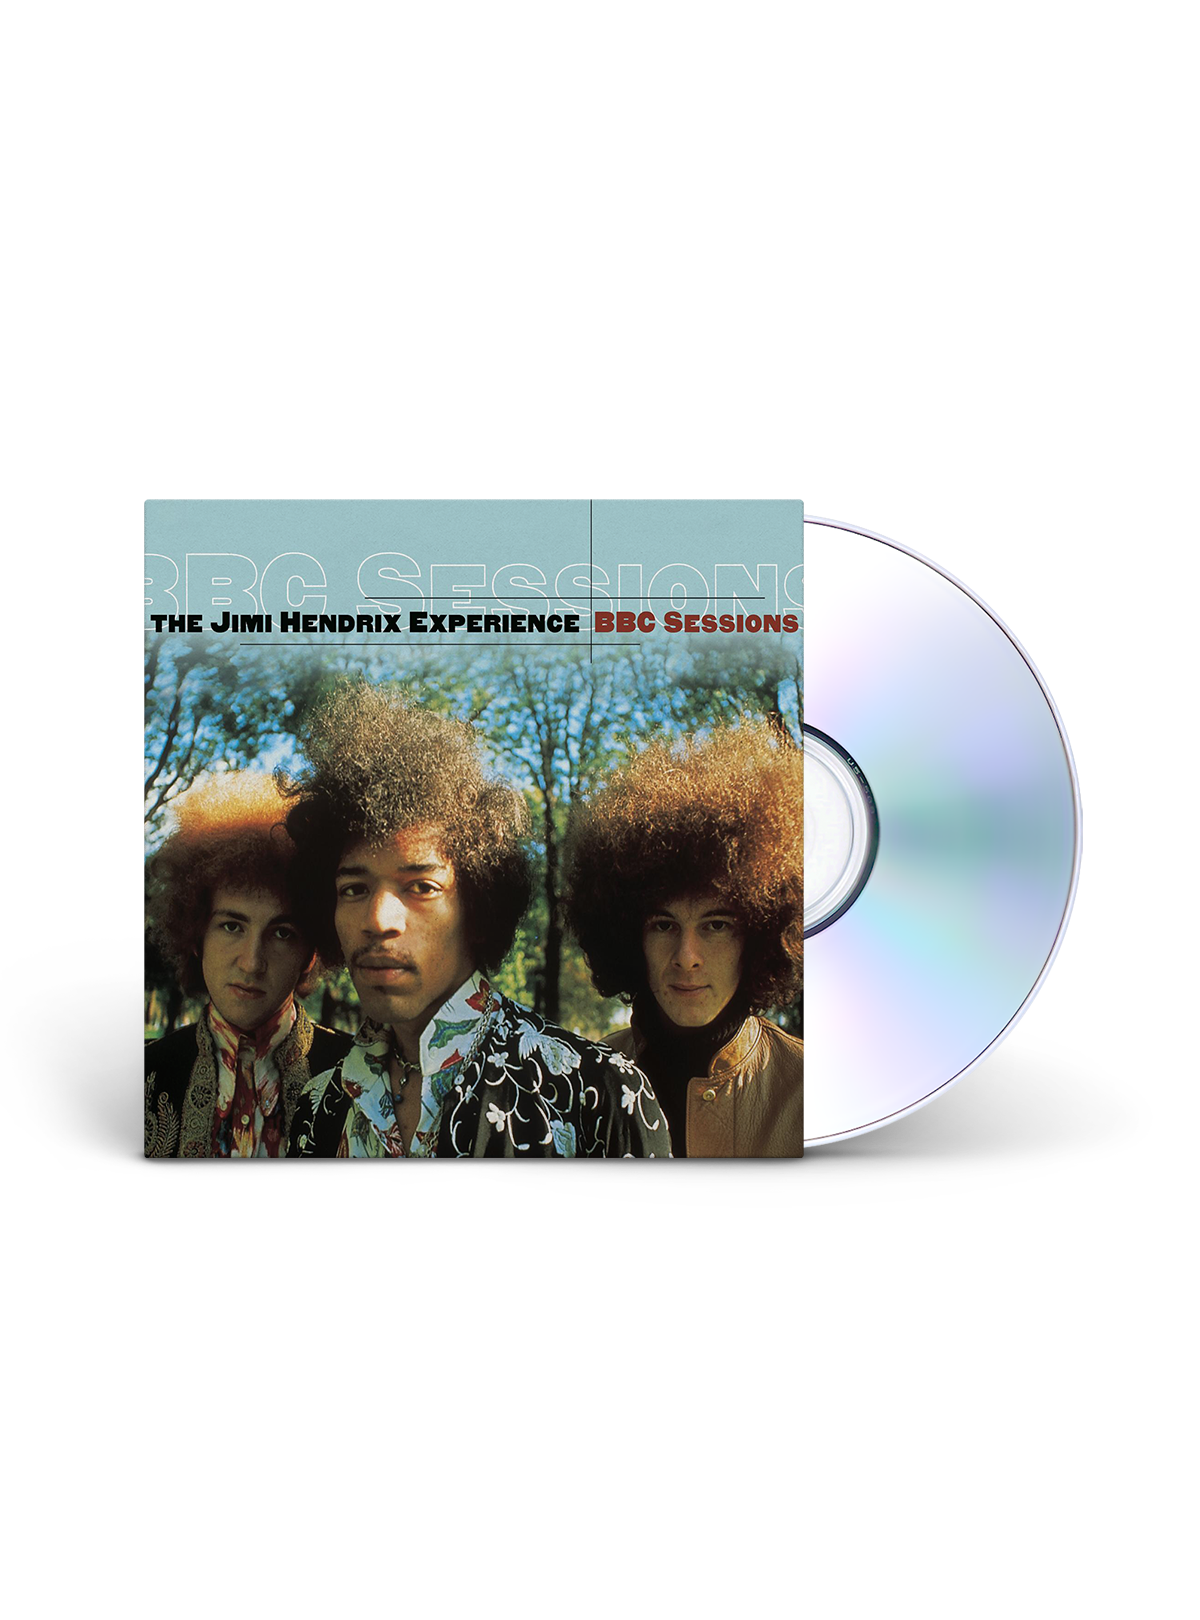 The Jimi Hendrix Experience BBC Sessions 2CD + DVD Deluxe Edition